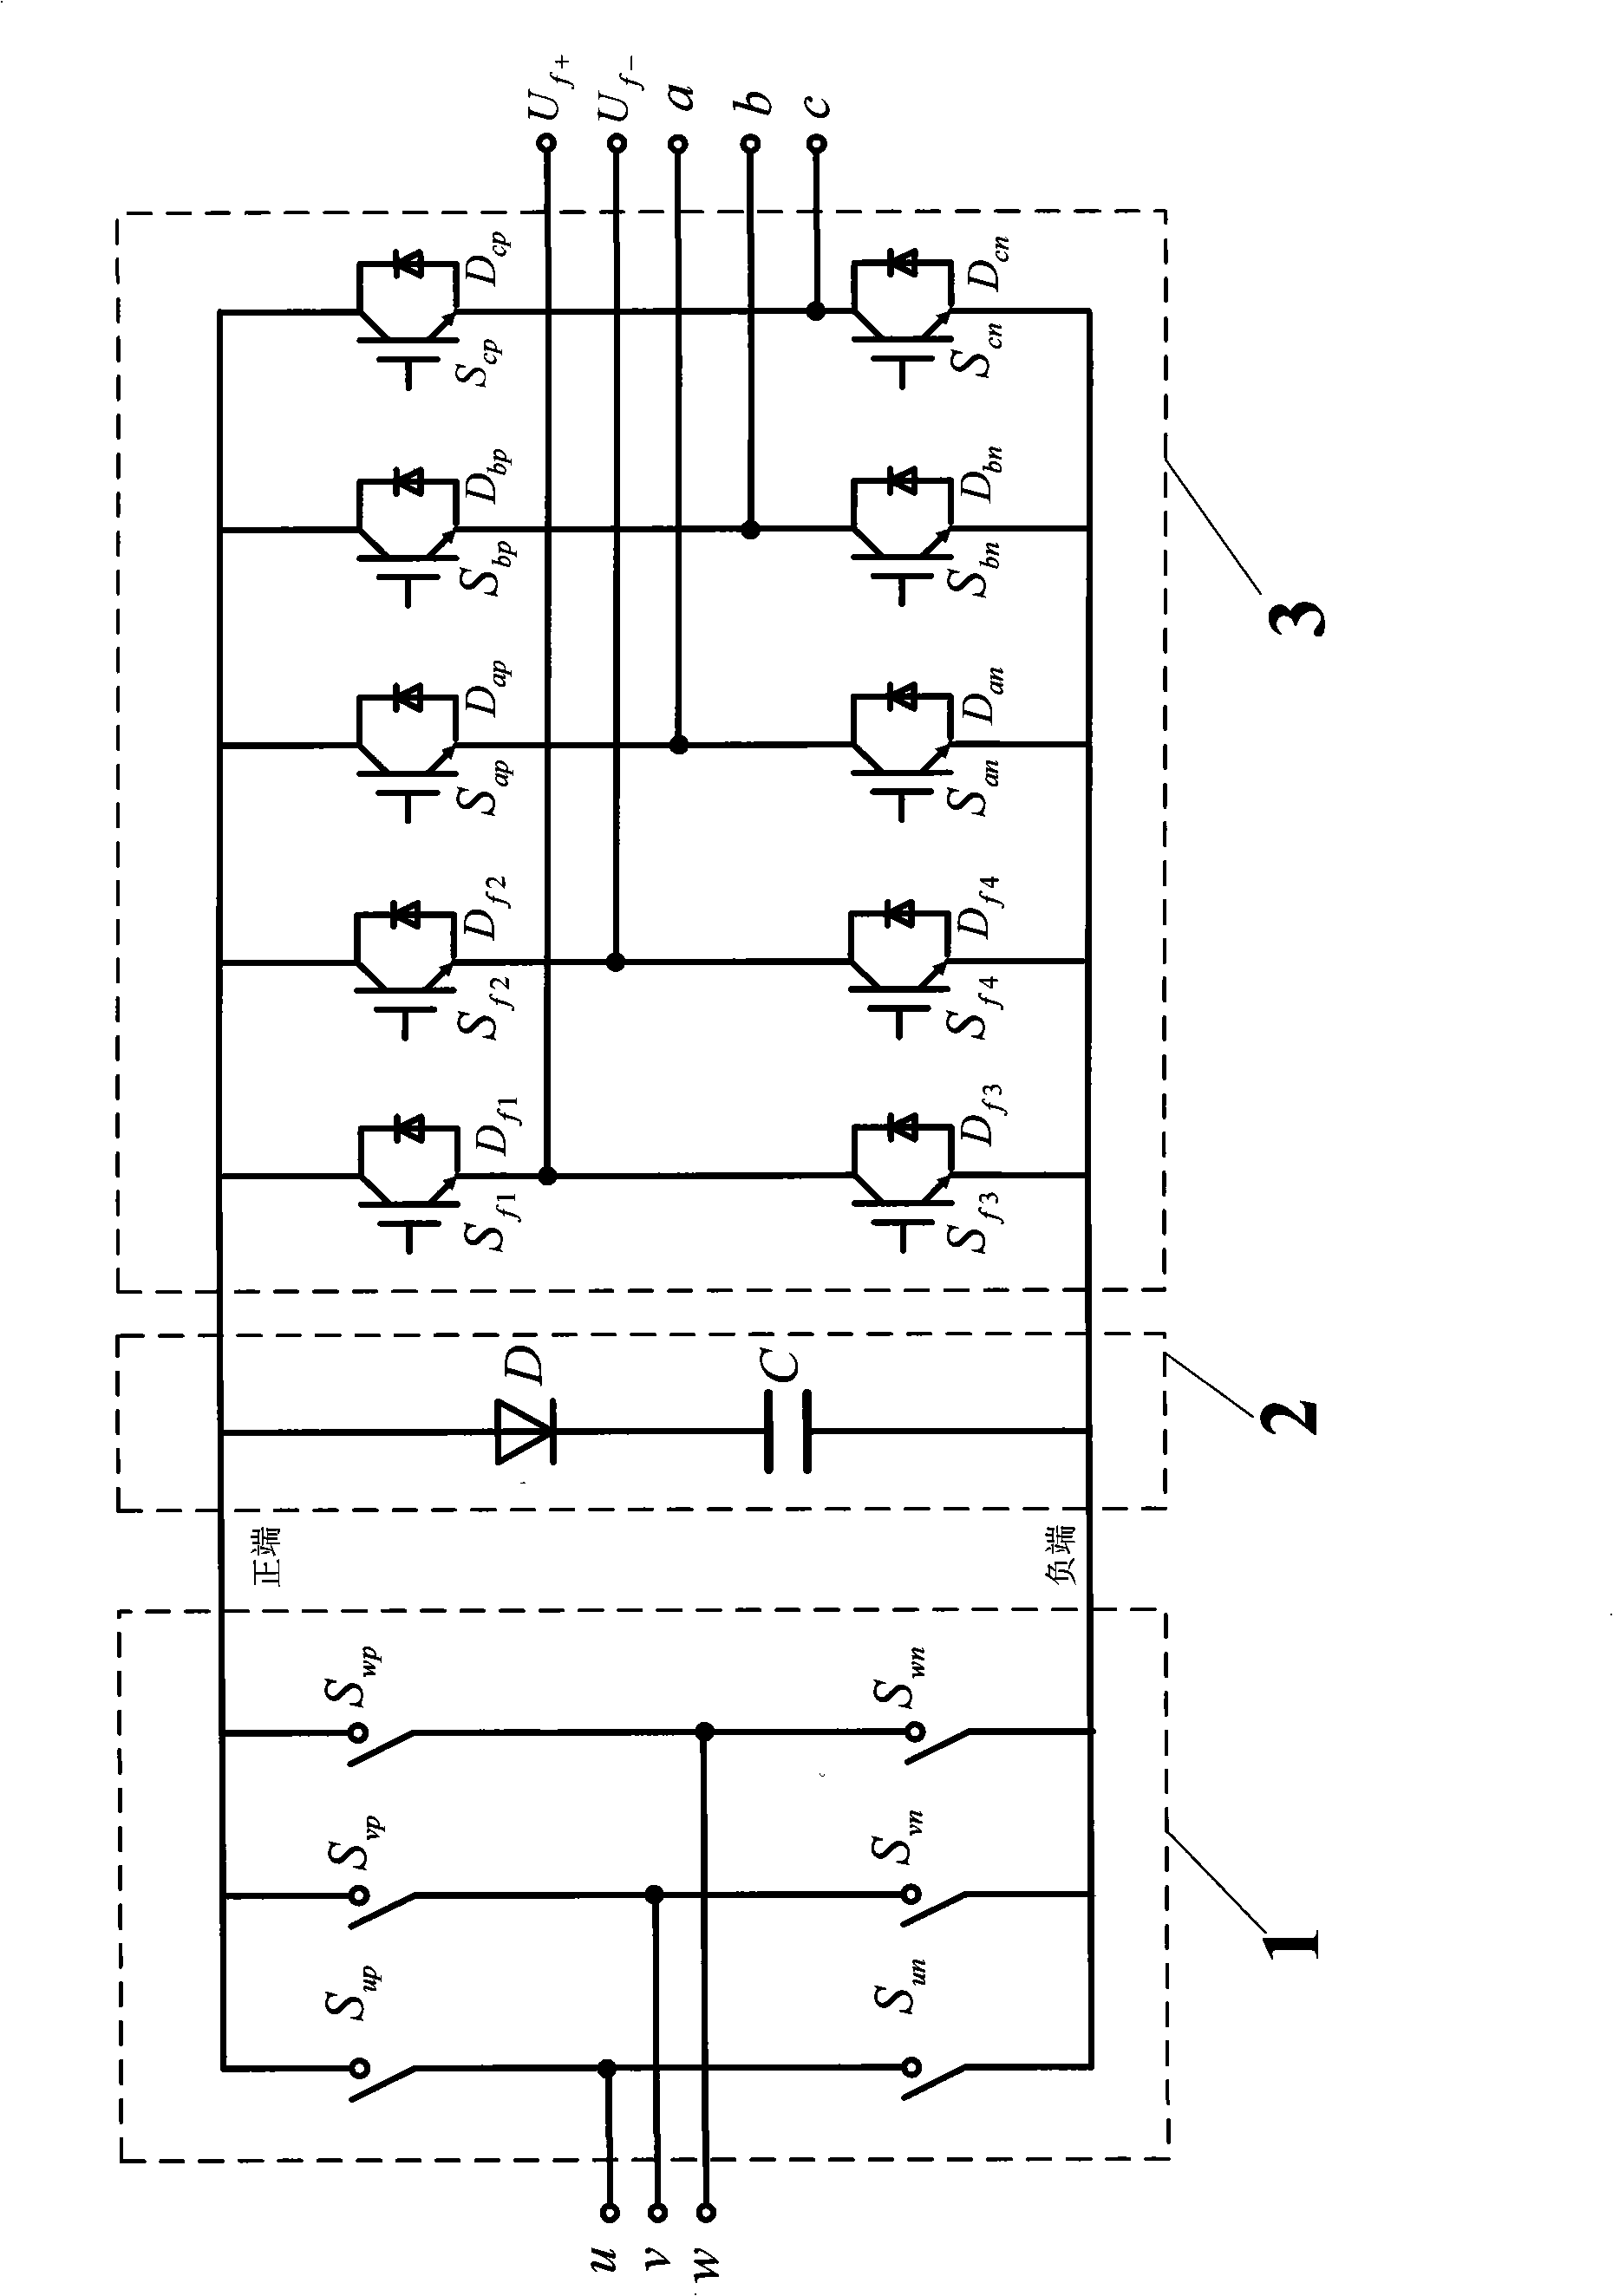 Twin-stage type matrix converter with direct-current excitation regulation and voltage frequency transformation